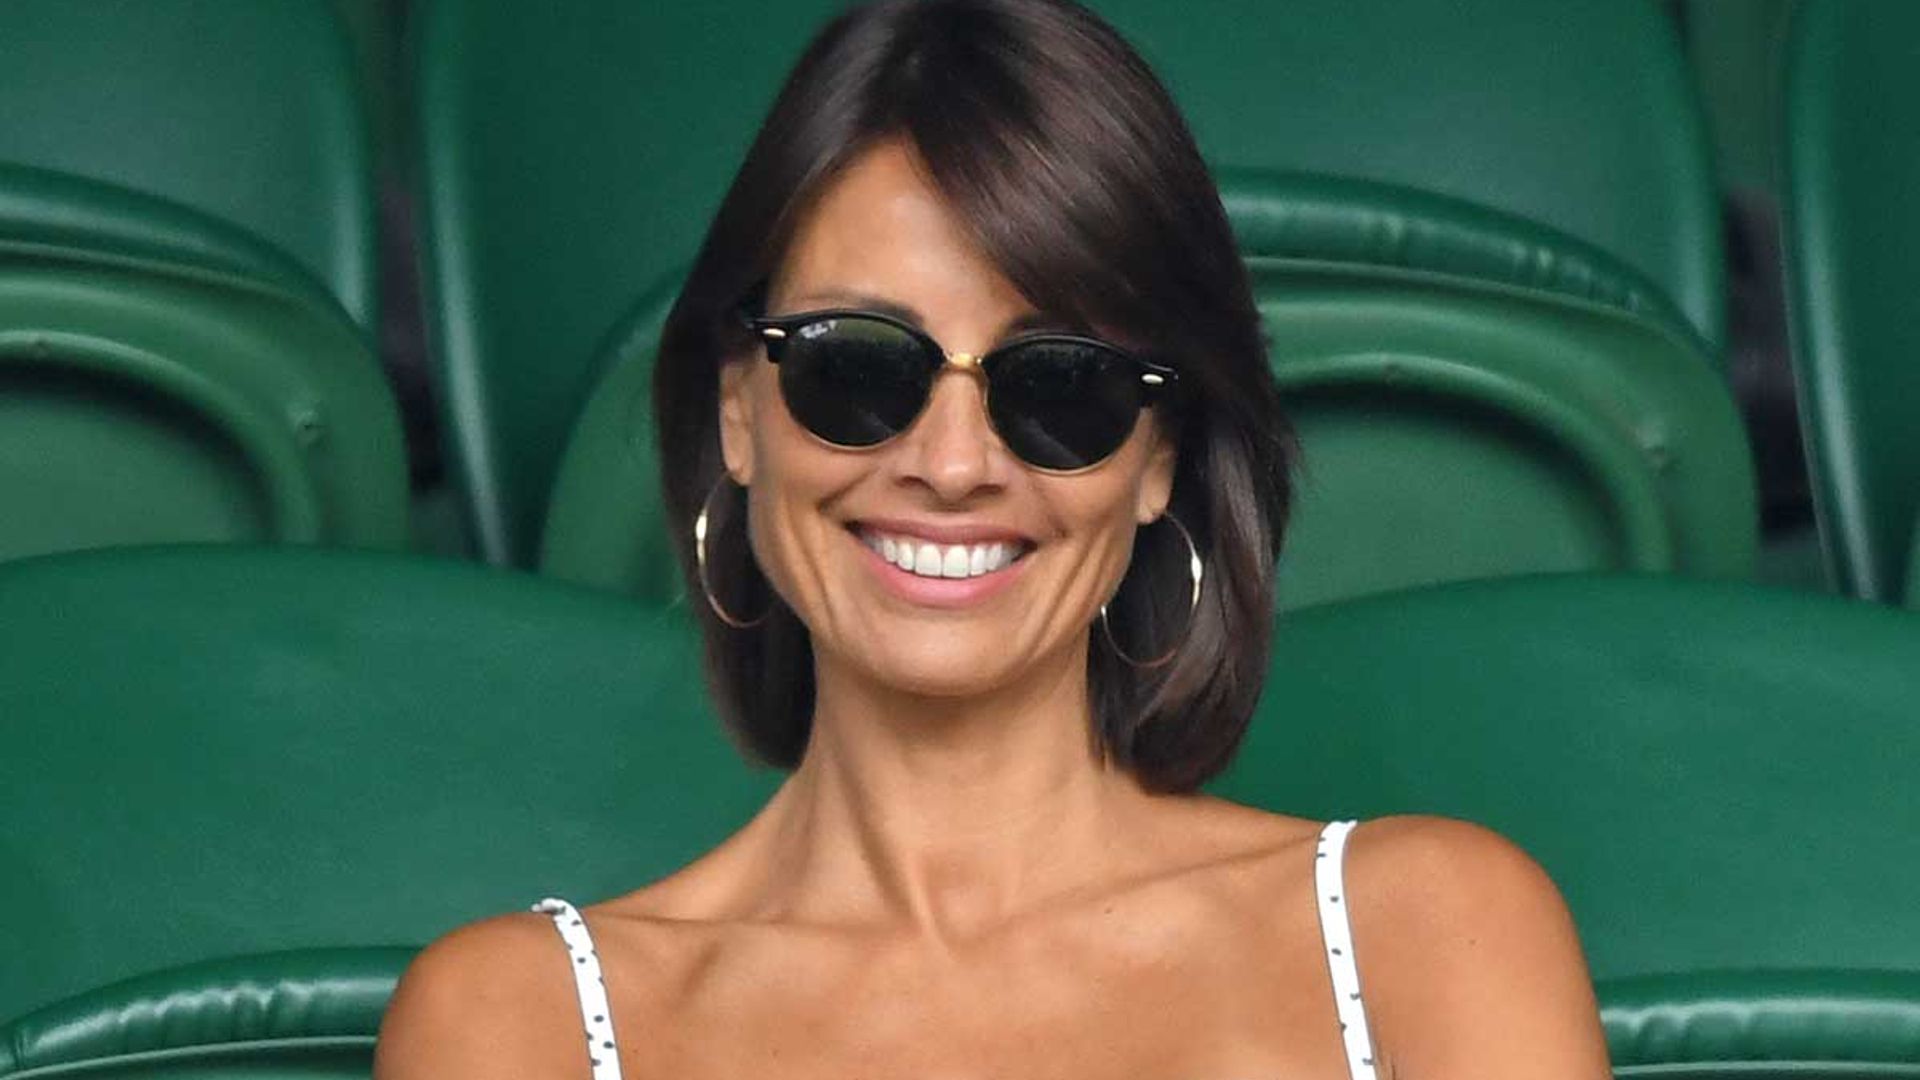 Melanie Sykes' secret to her incredible bikini body at 51 - and it's so achievable